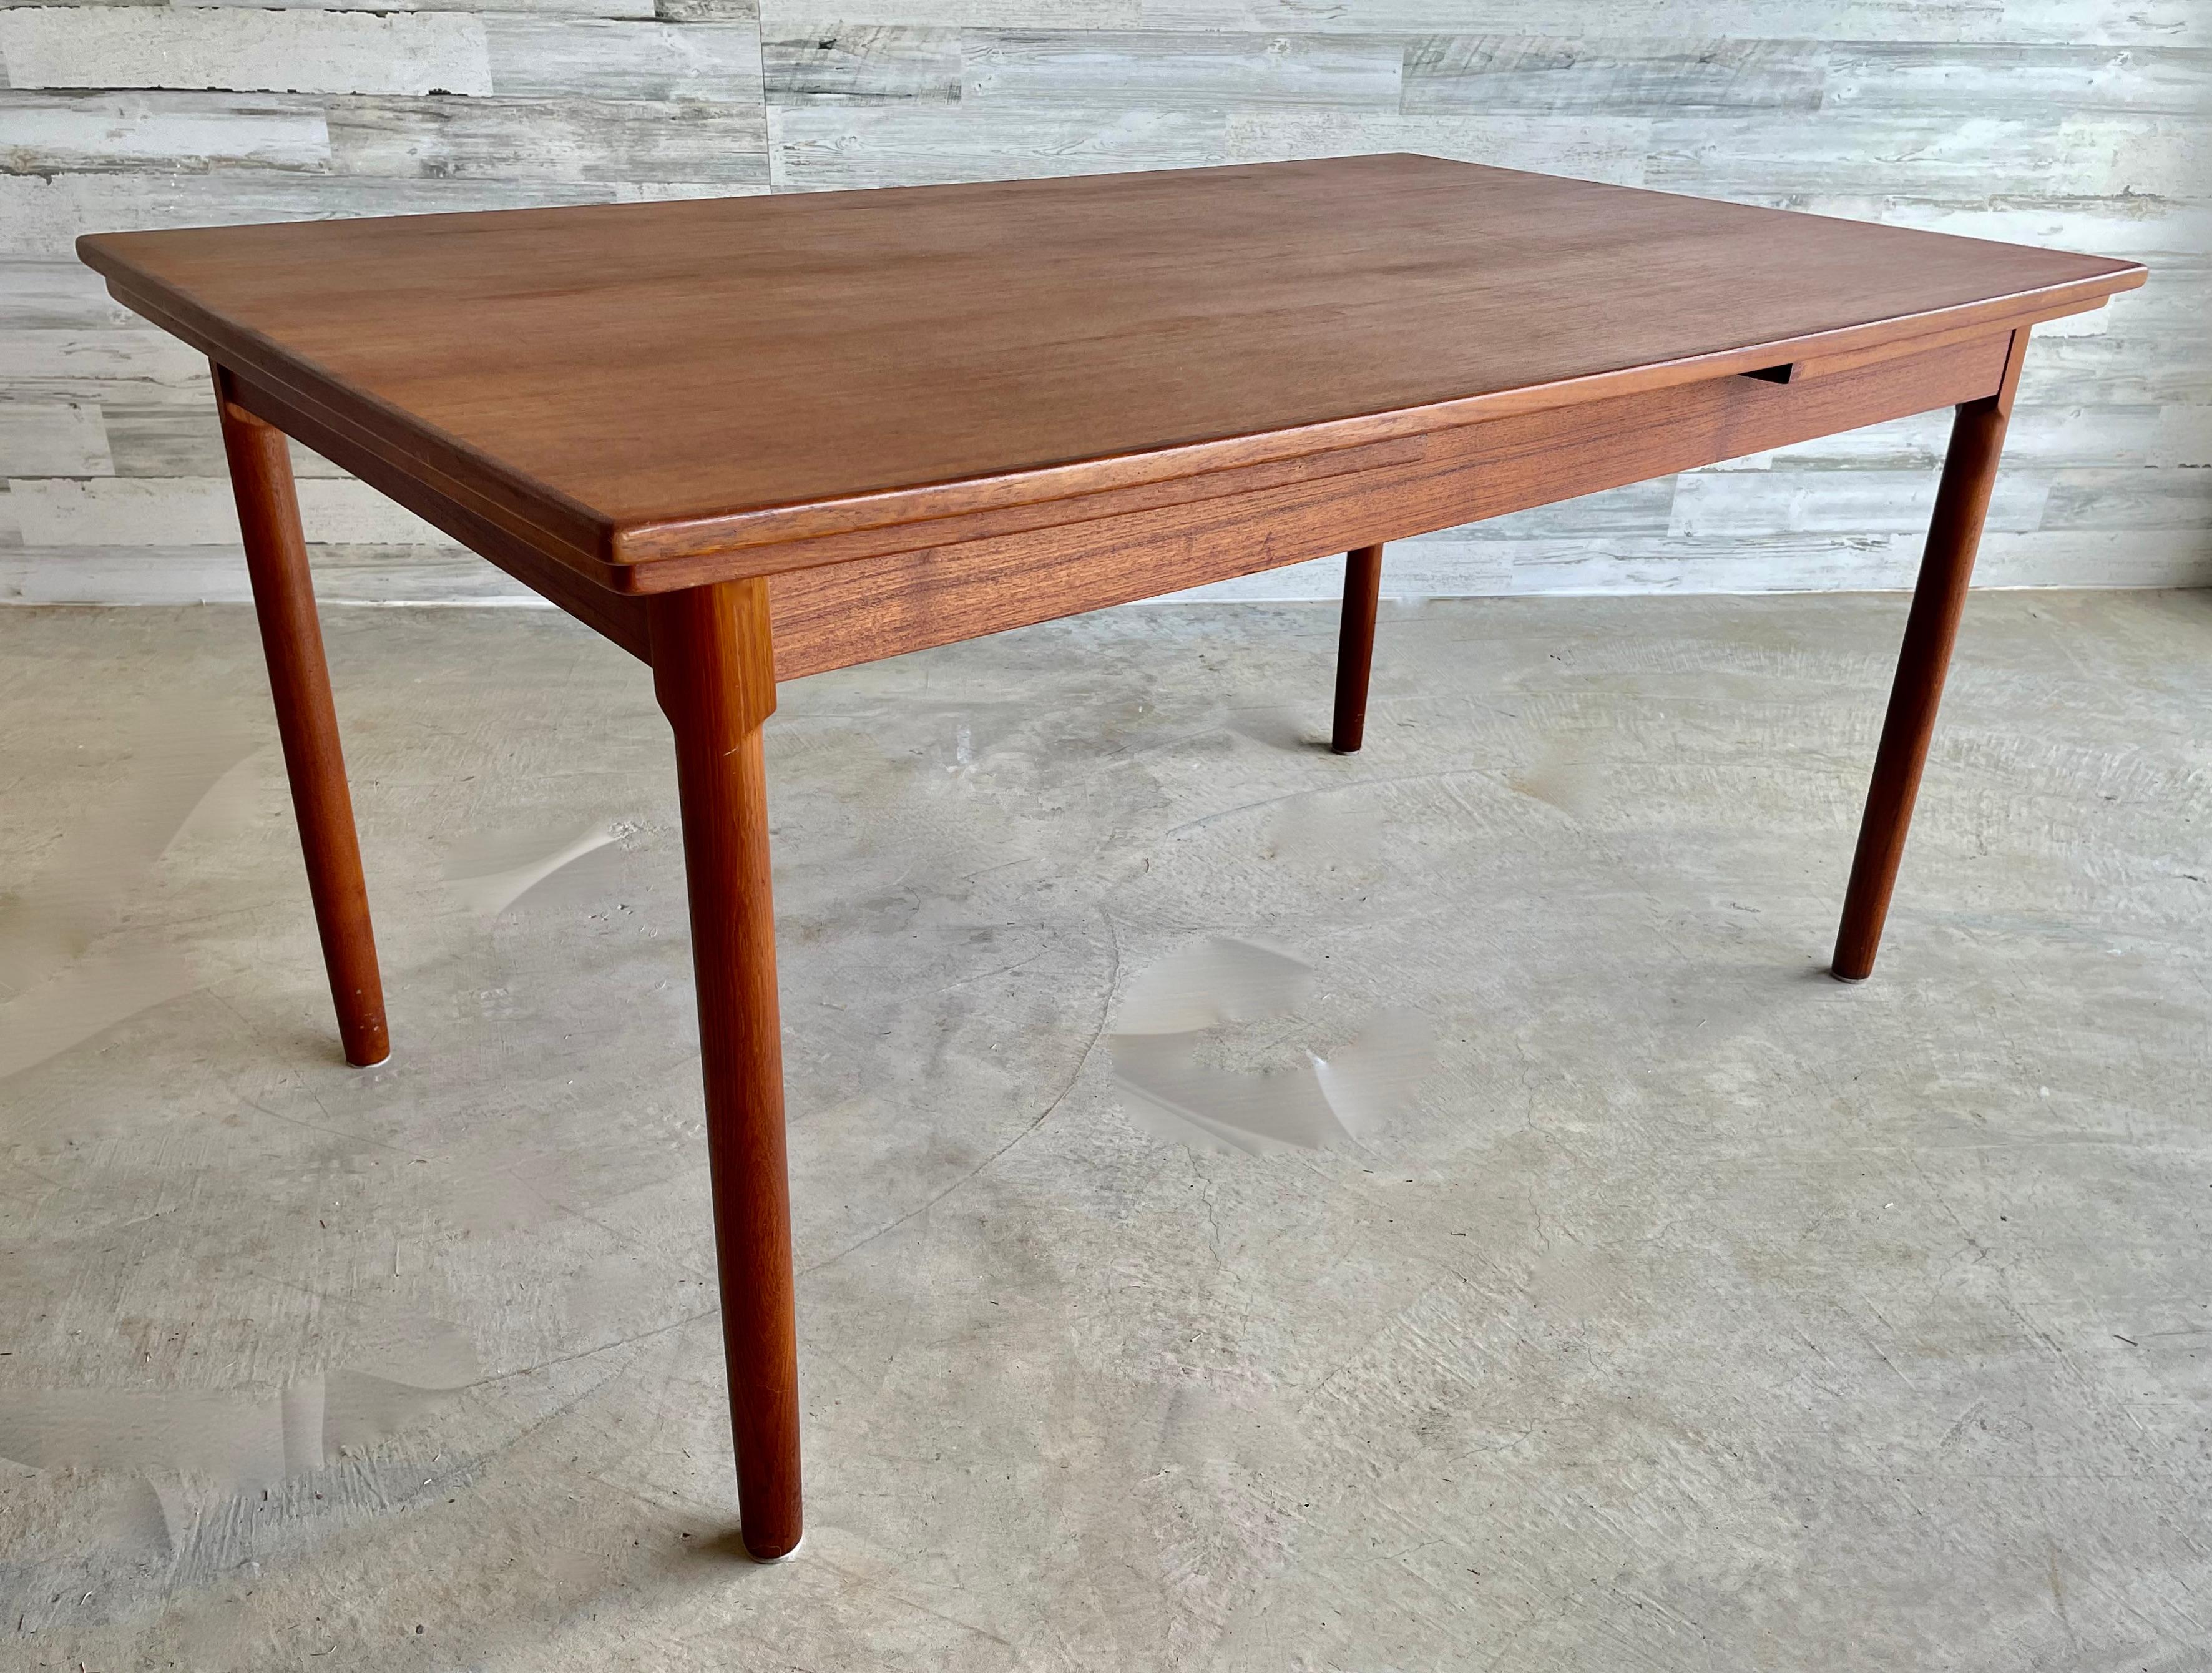 A/S Randers Møbelfabrik Danish teak draw leaf dining table. Original Label Under the Table top.
Total length with both leaves extended 101 inches long. Each leaf is 21.25 L.